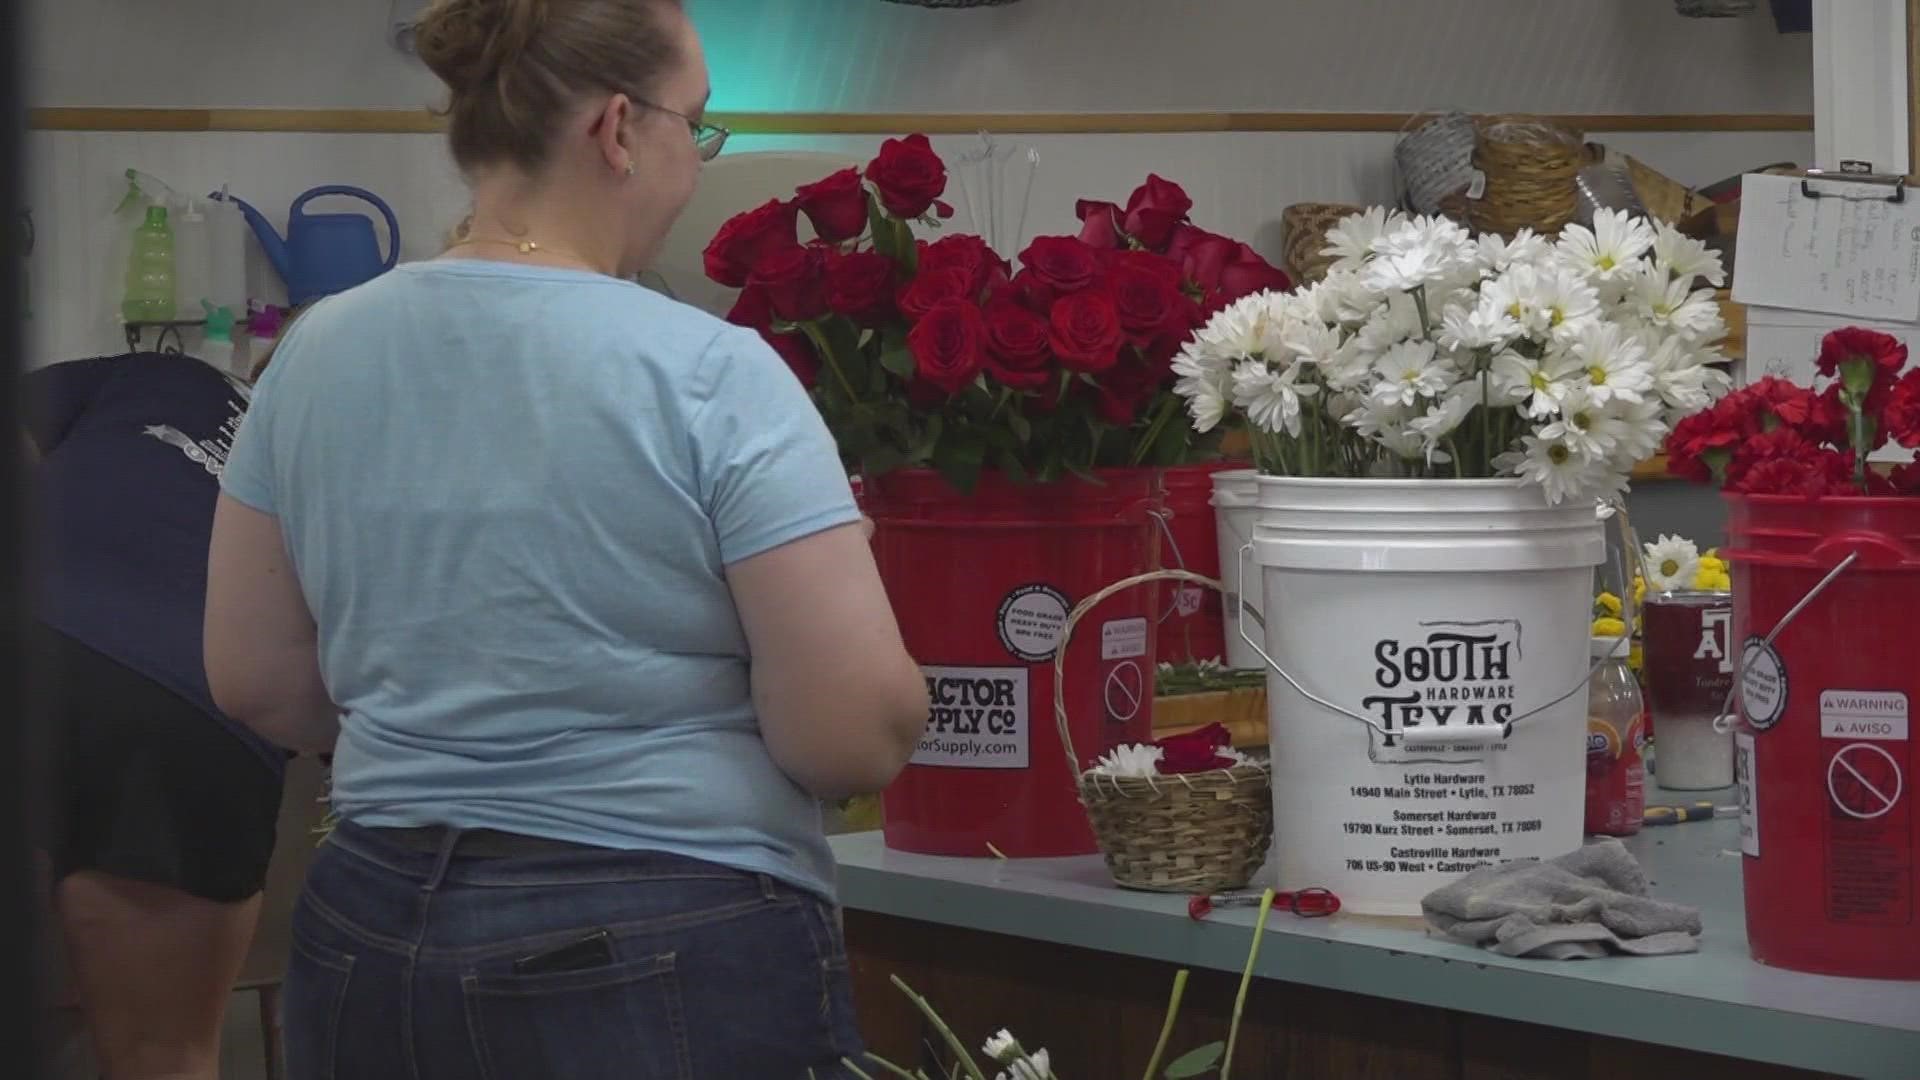 "All the florists around knew what it takes to do a single funeral, let alone all of these little angels," said flower shop owner Veronica Berger.